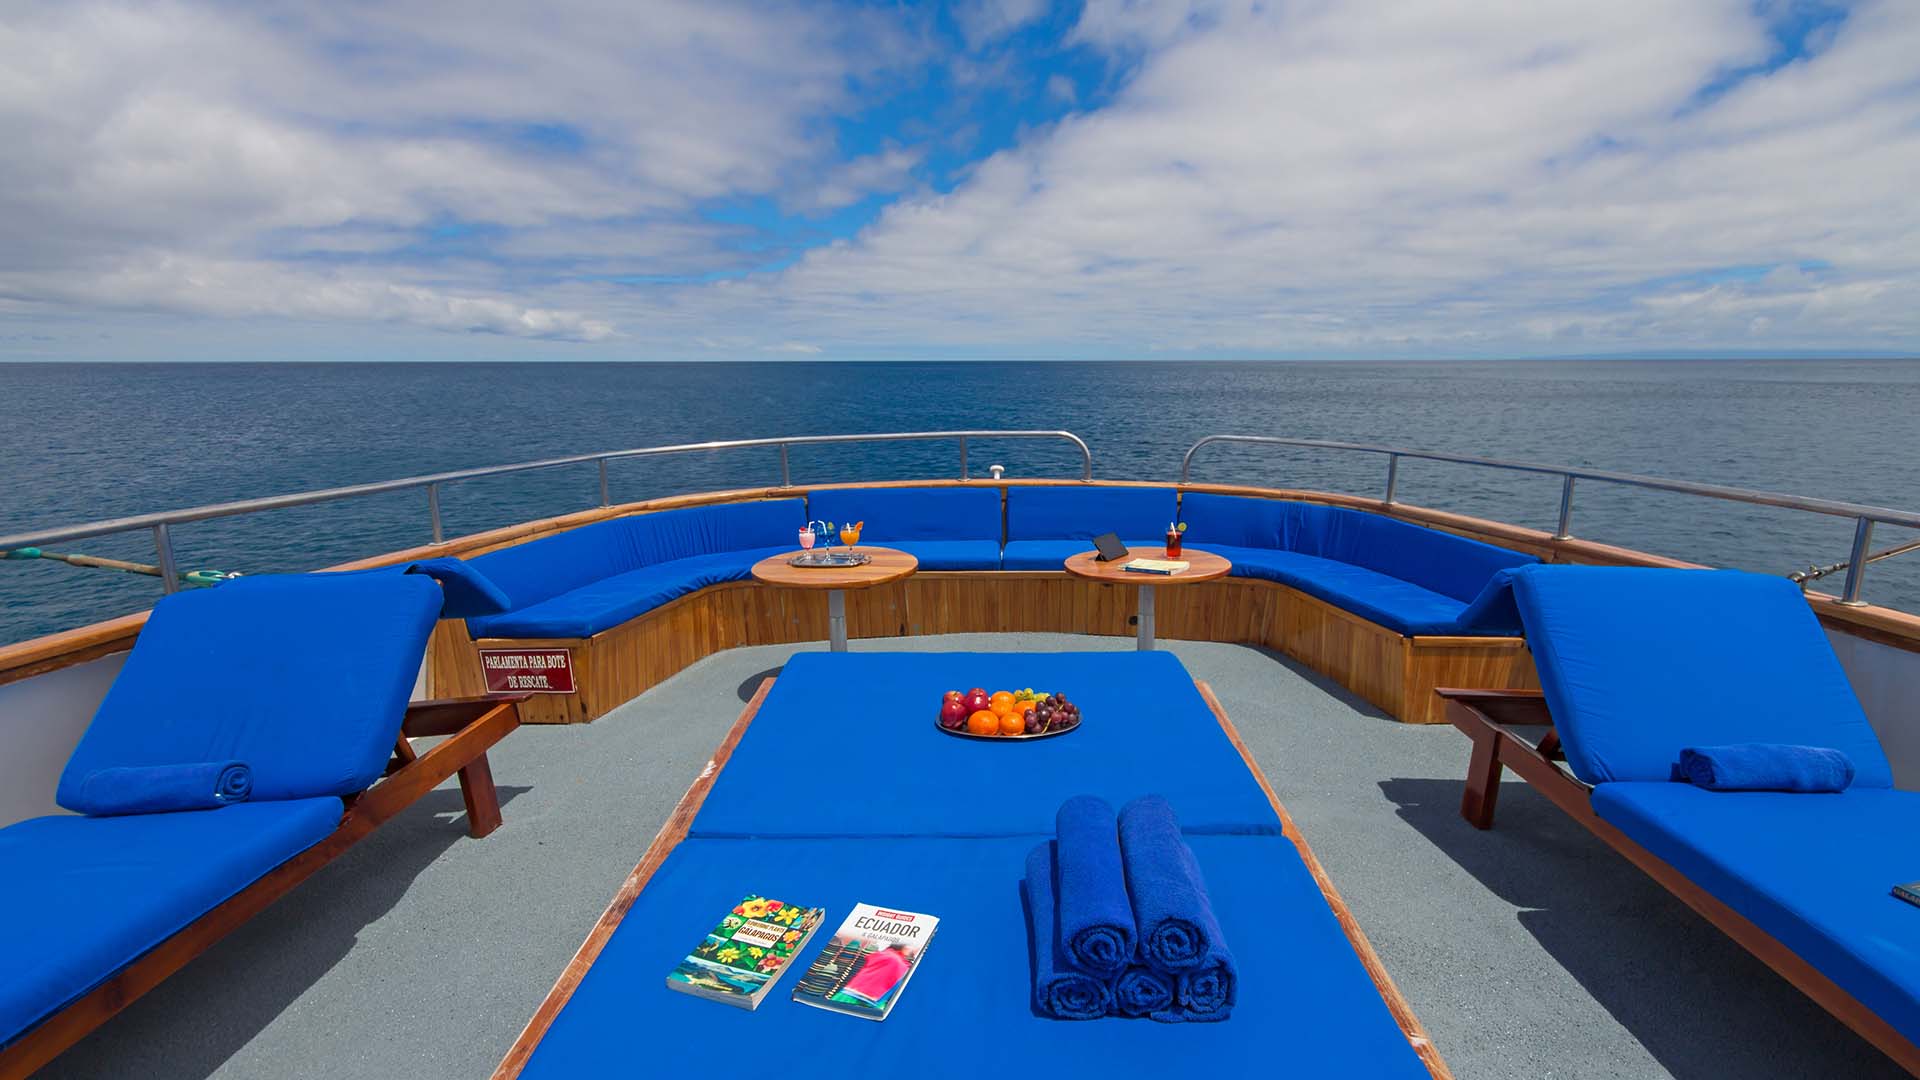 Relax in the sun on the deck as you sail on the Beluga Yacht, Galapagos Islands, Ecuador